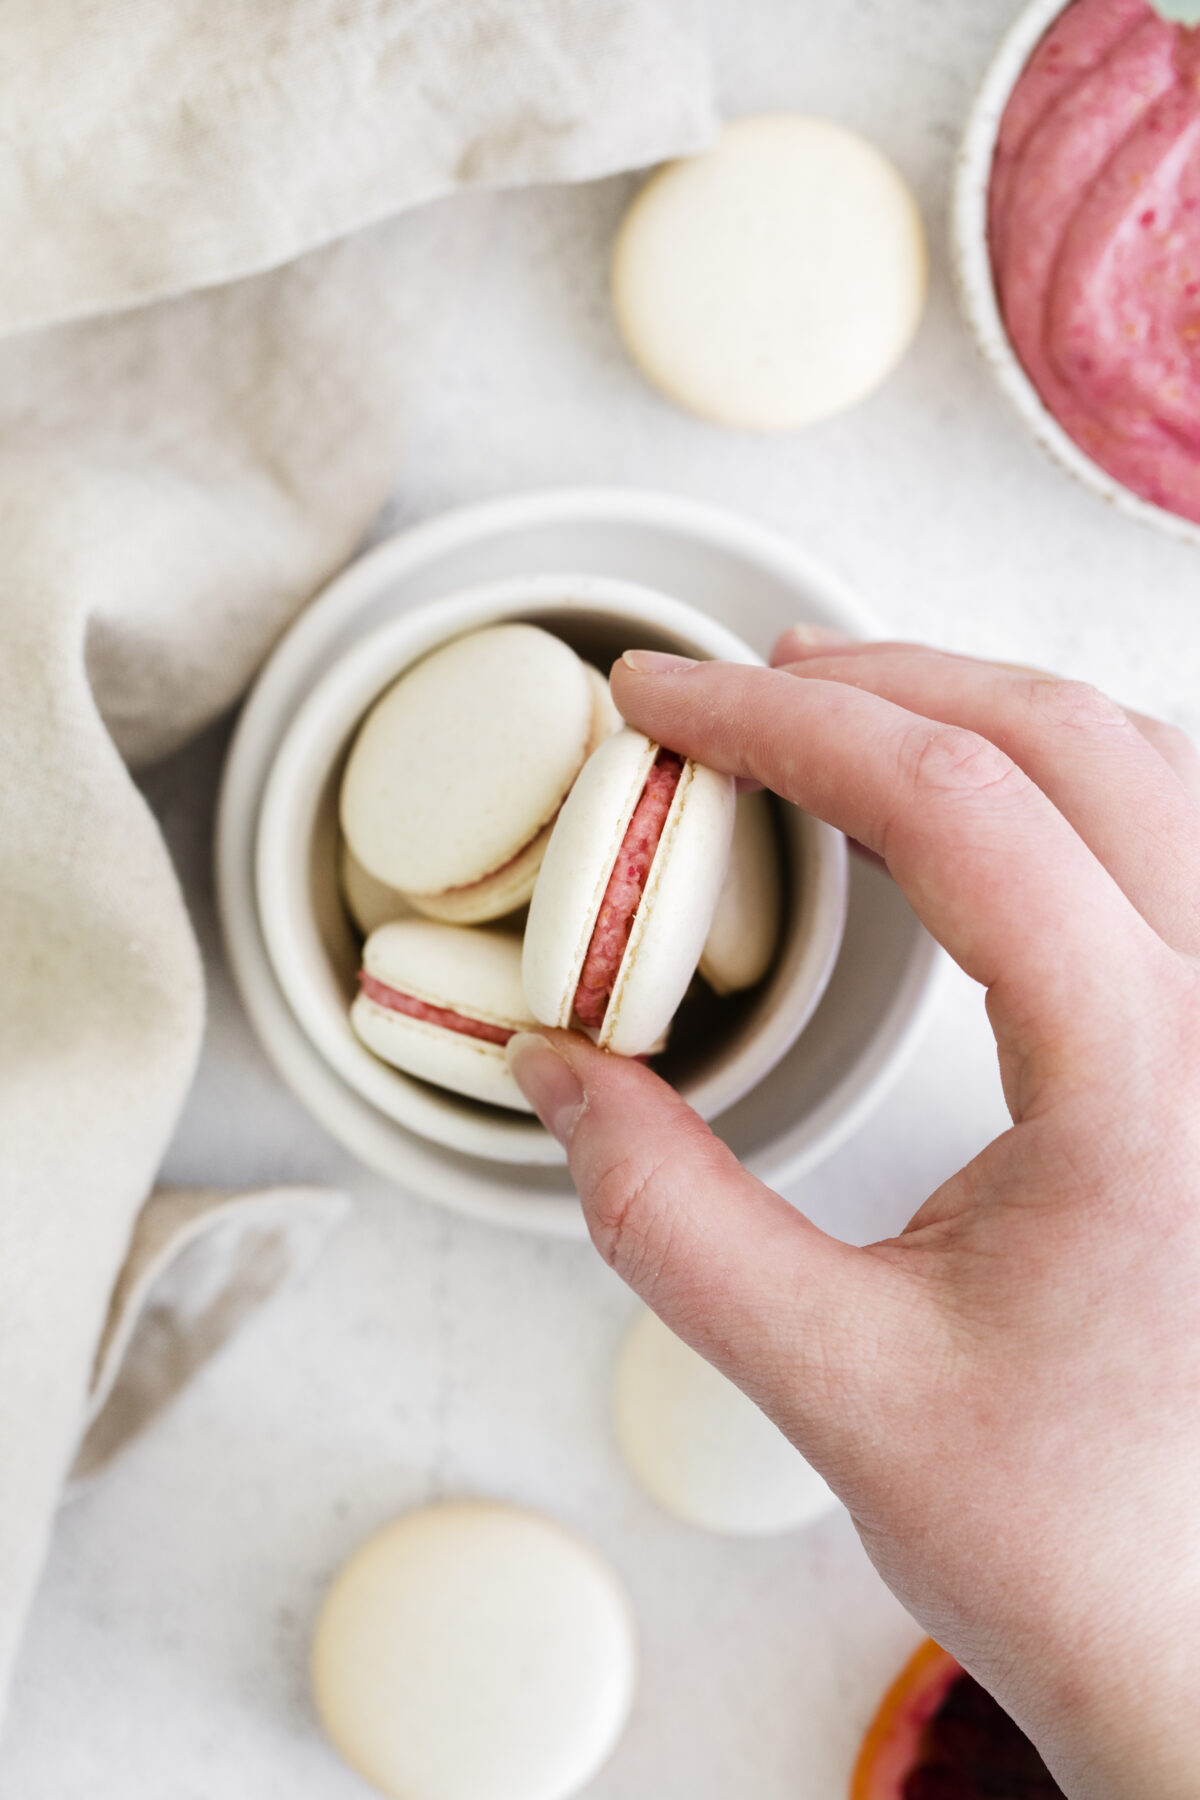 This Blood Orange Macarons recipe is sweet & chewy with a tangy citrus flavour; they're sure to be the star of the show at any holiday party.